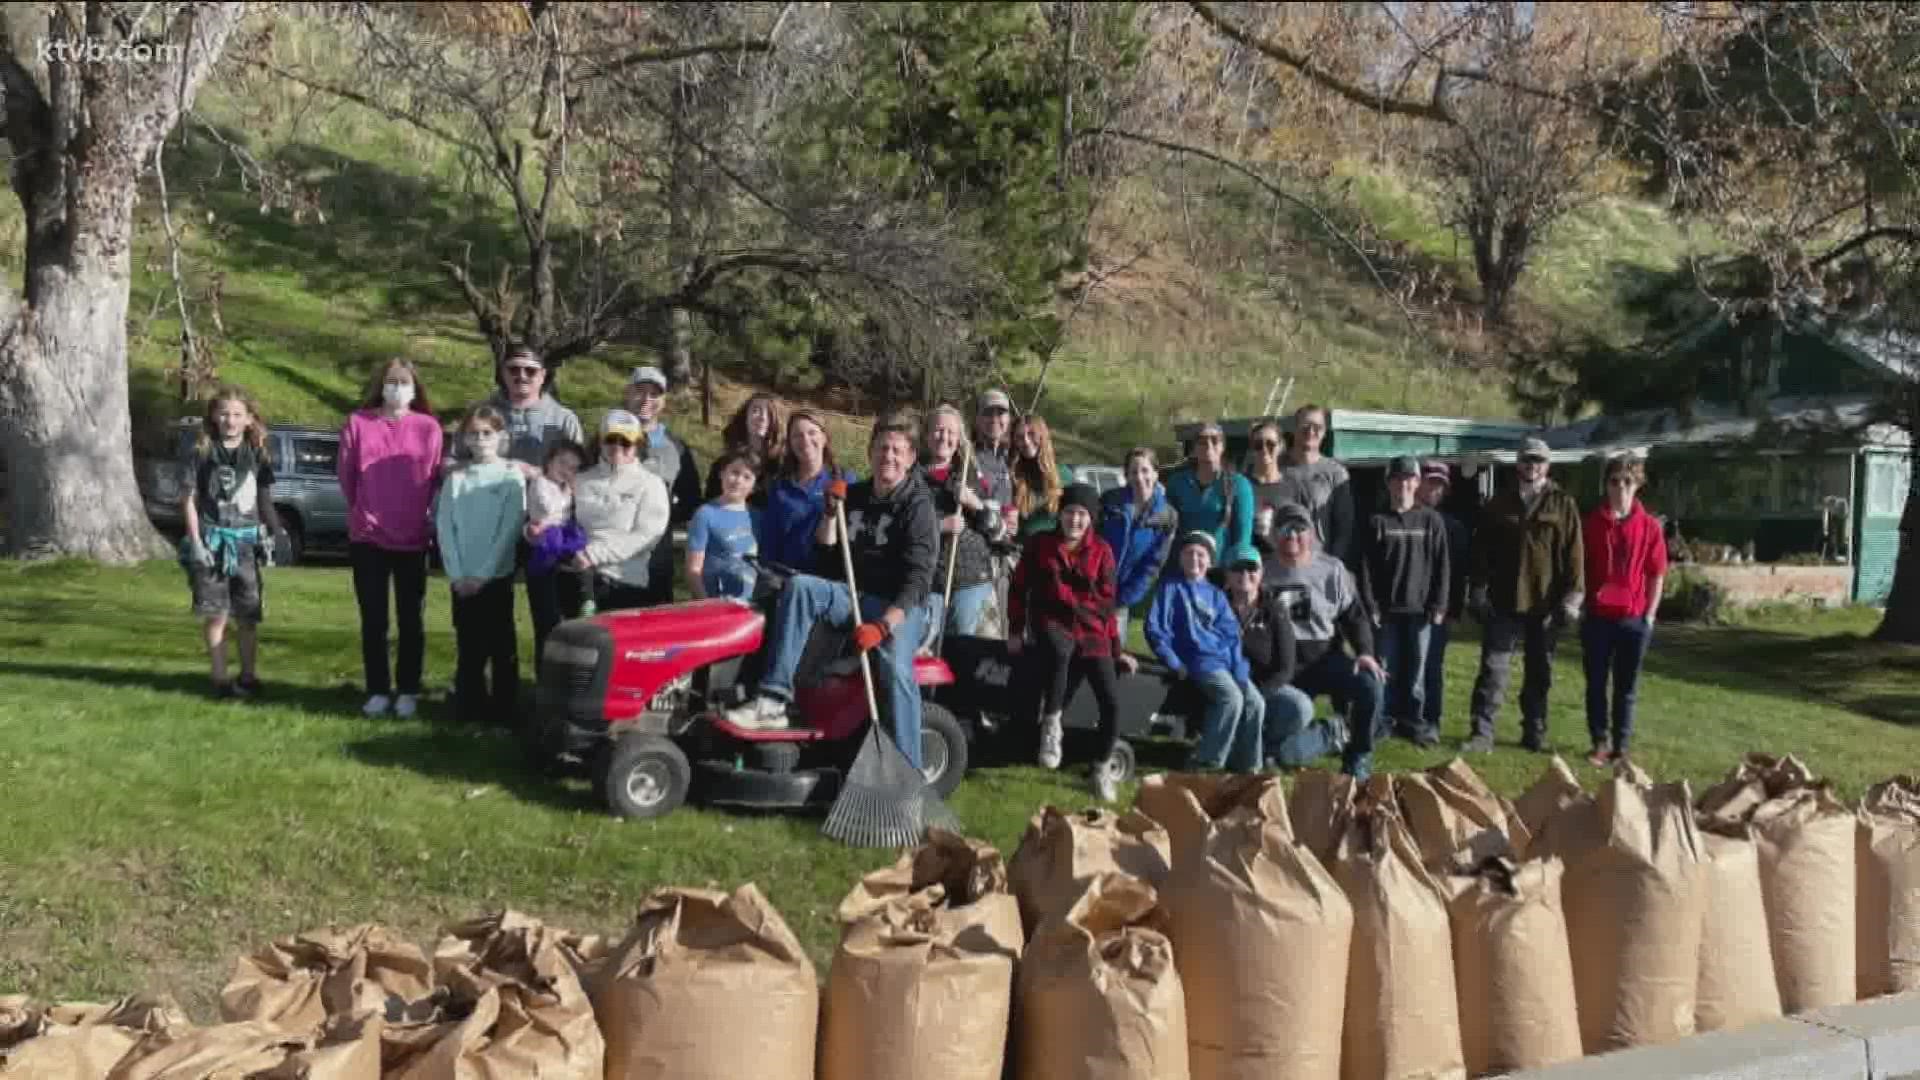 More than 300 teams made up more than 2,500 volunteers grabbed their rakes and helped clean up 700 hundred yards.